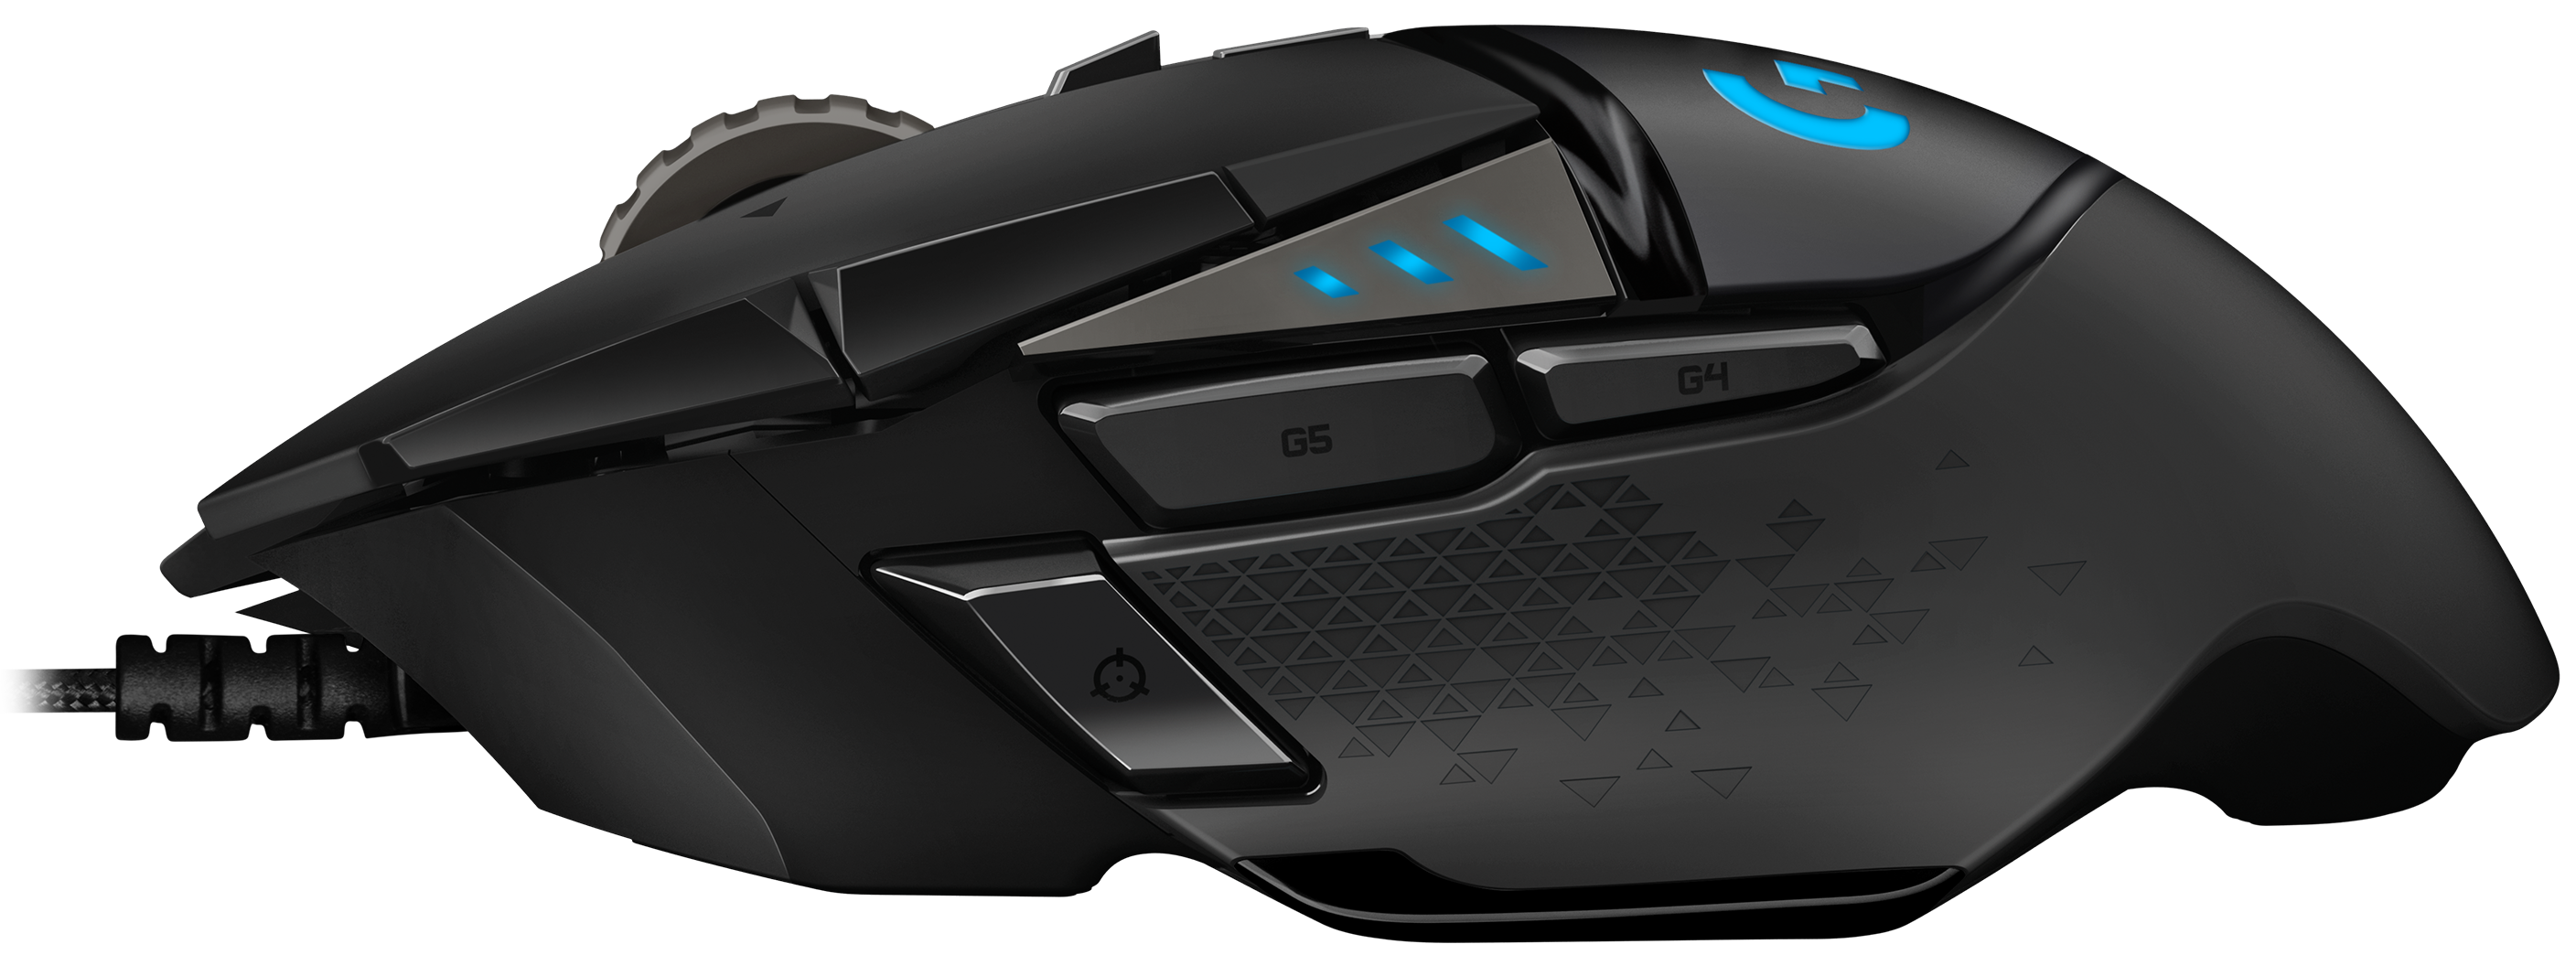 Logitech G502 gets upgraded with the company's HERO sensor